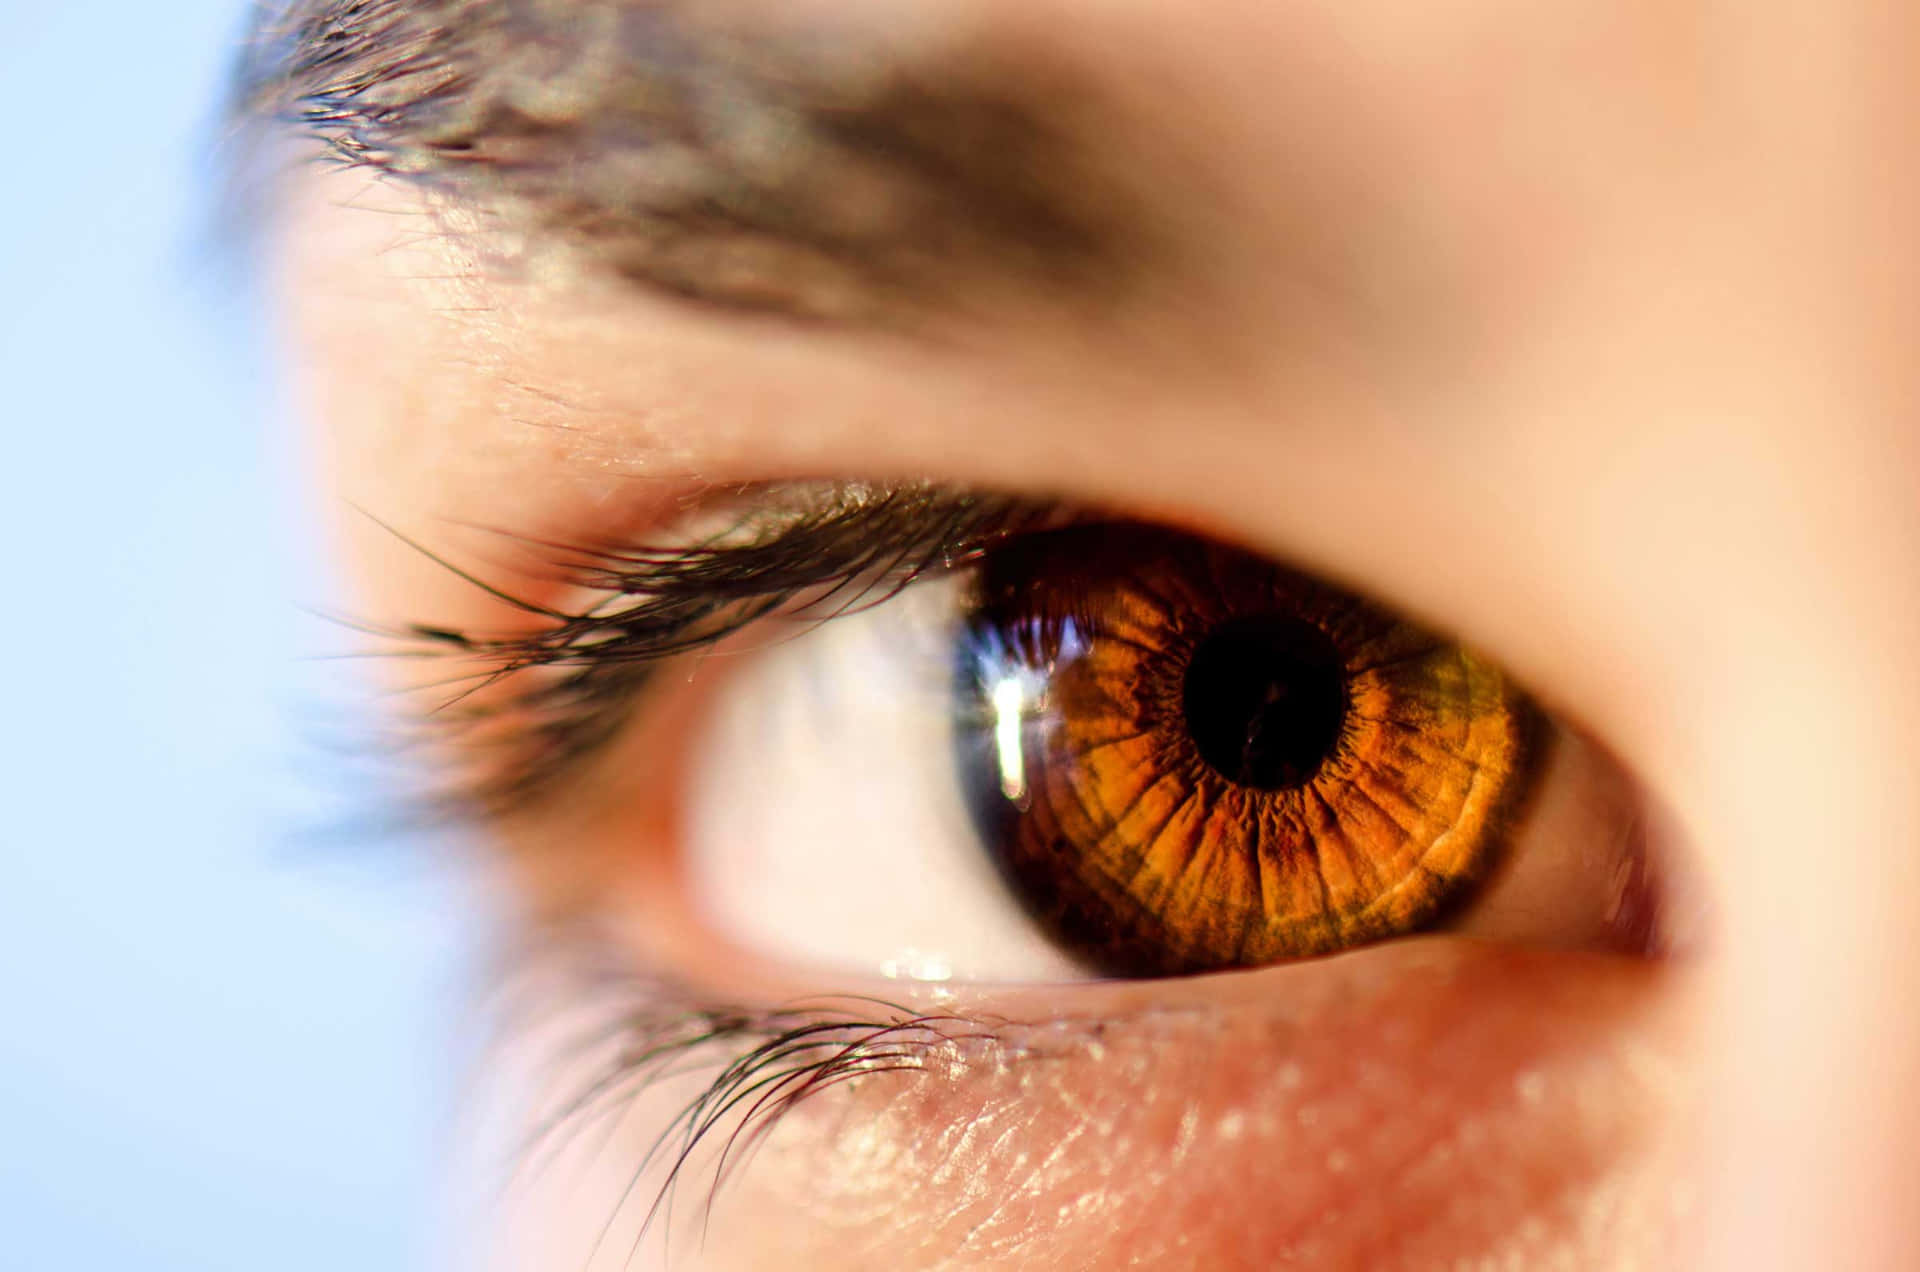 A Close Up Of A Woman's Eye